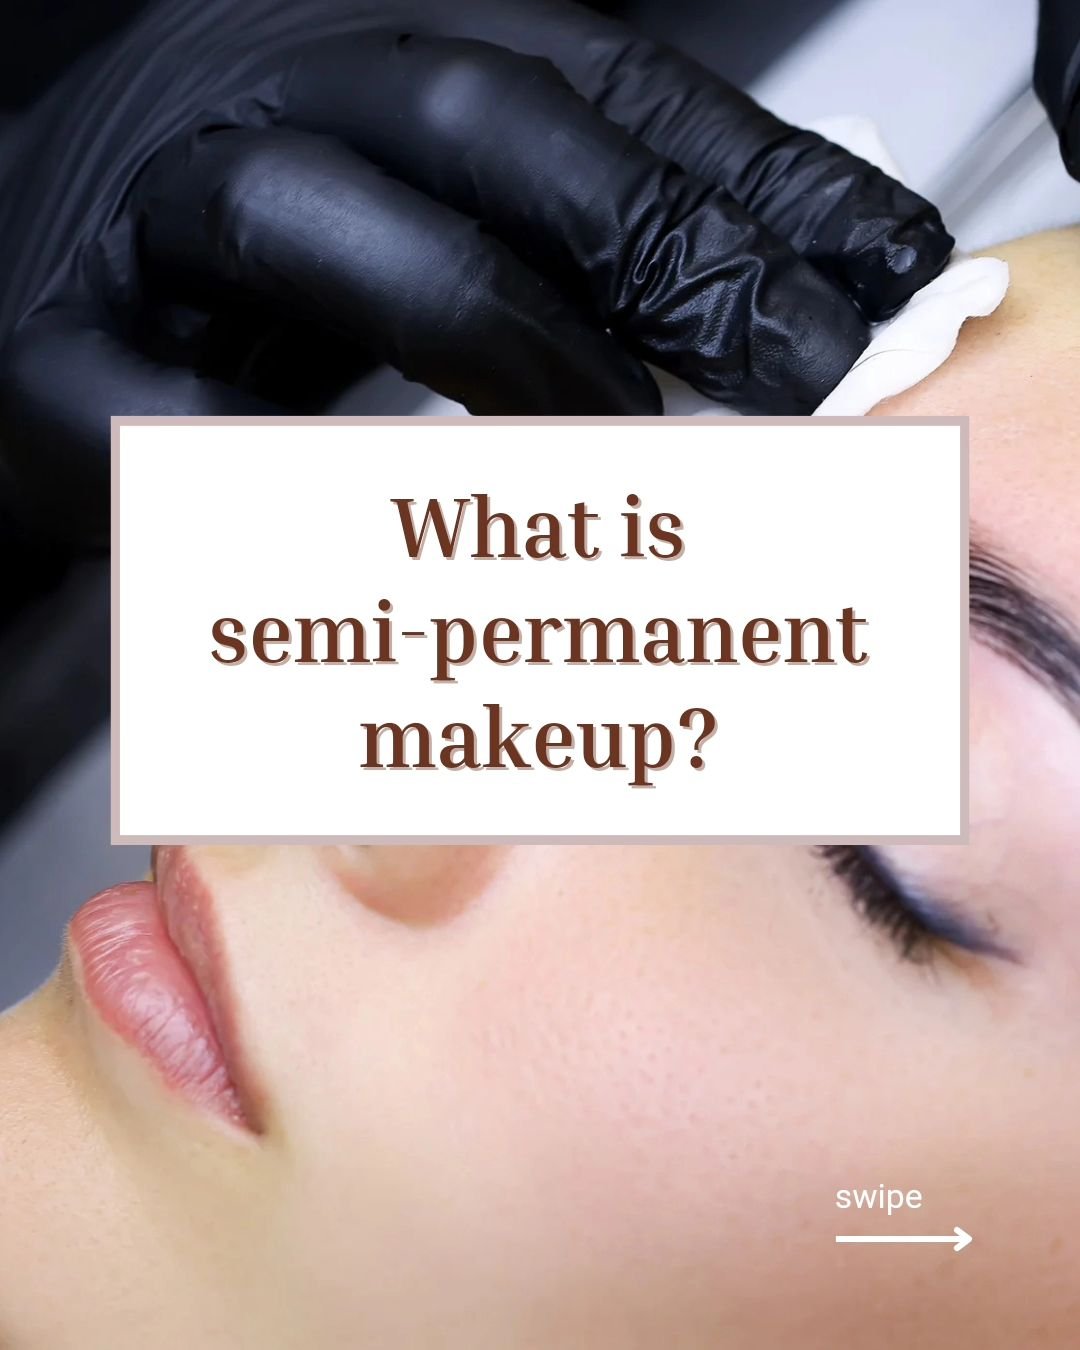 ✨ What is semi-permanent makeup?

Semi-permanent makeup involves depositing pigment into the upper layers of the skin.

It enhances features and lasts longer than traditional cosmetics.

🤷&zwj;♀️ How does it work? 

We use precise techniques to crea